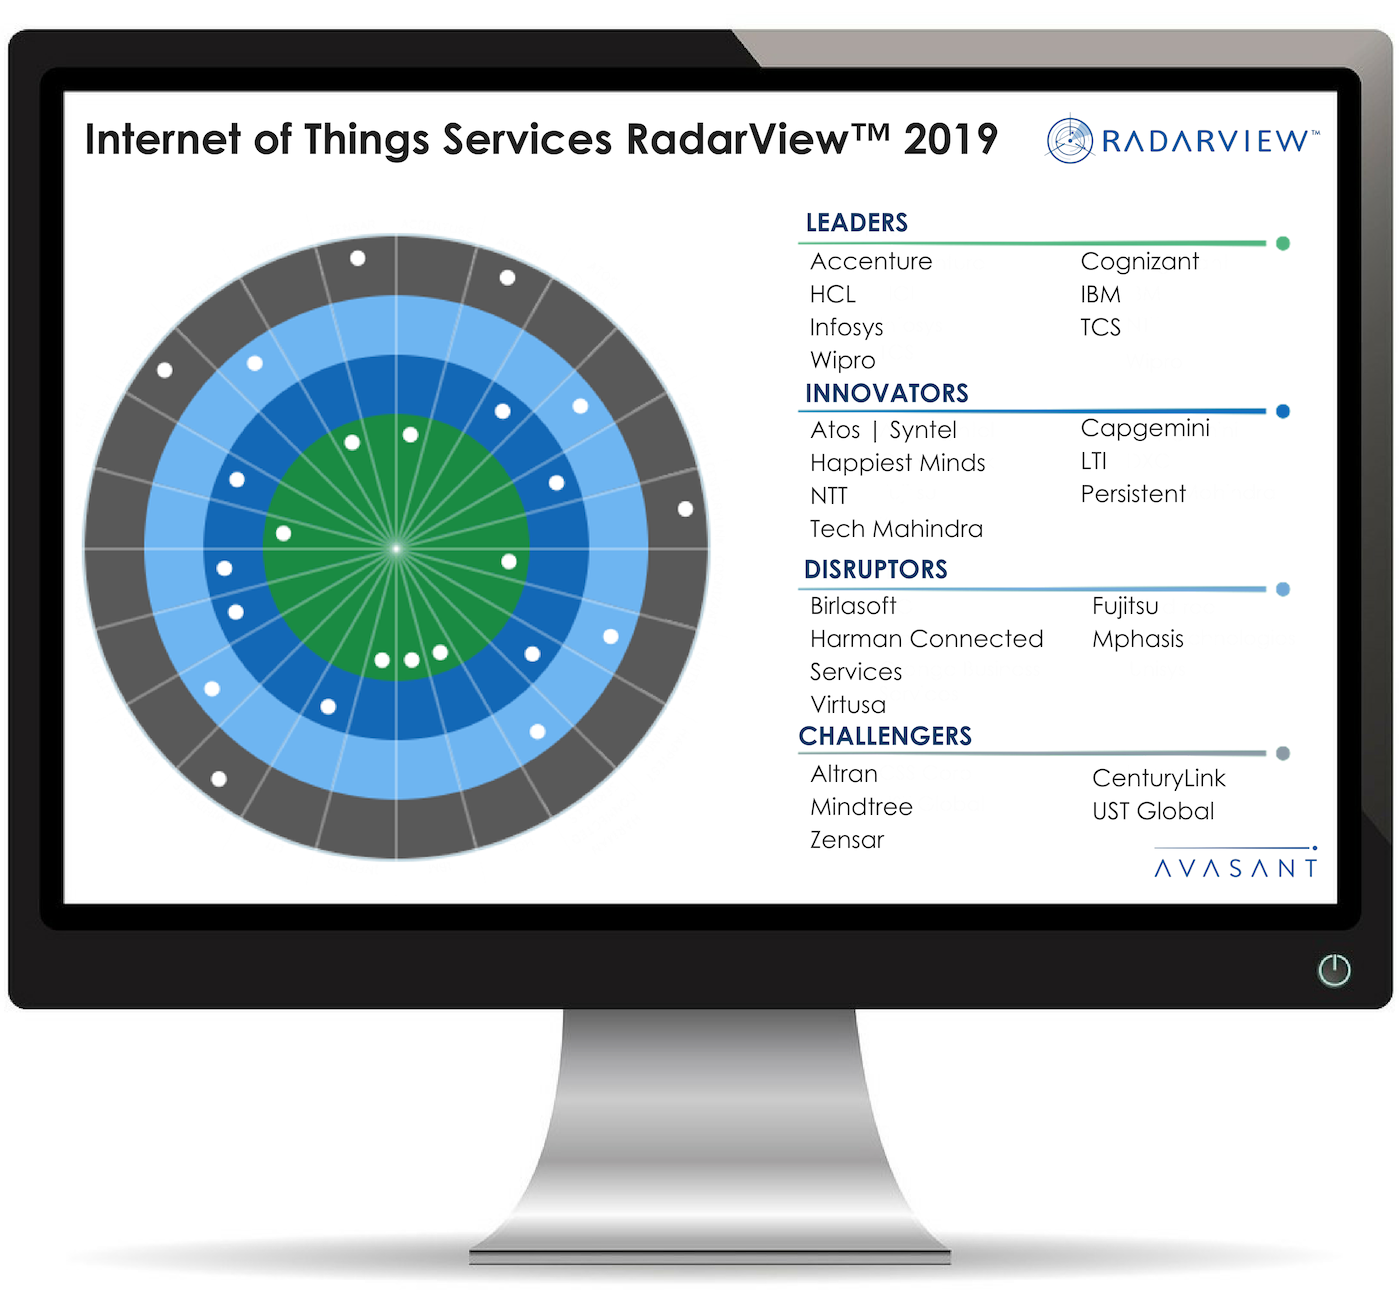 IoT Graphic Updated for provider profiles 1 - Internet of Things 2019 Atos | Syntel RadarView™ Profile